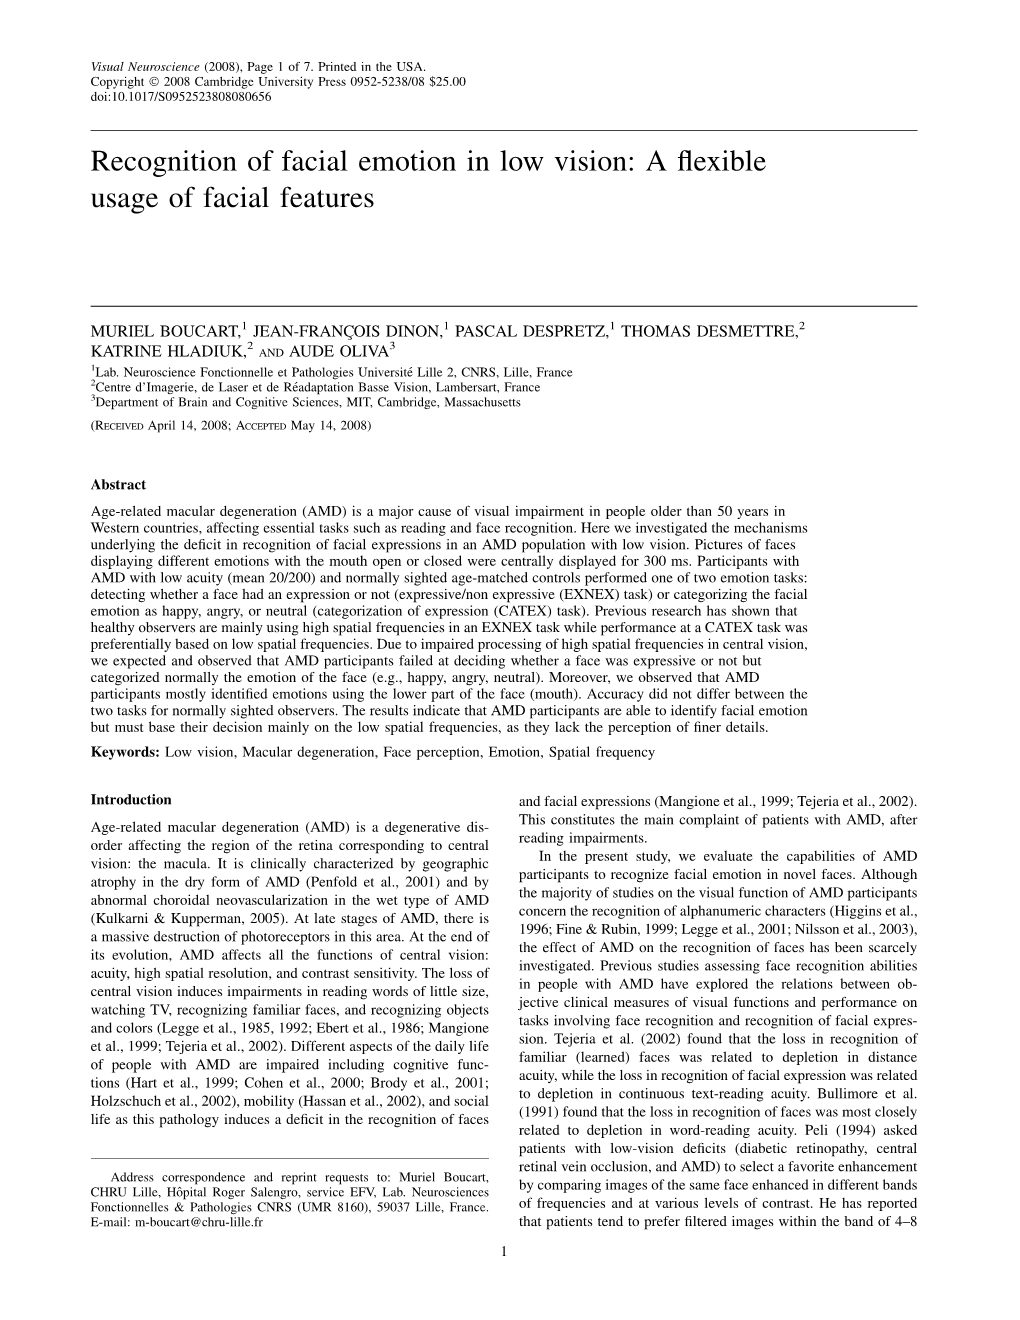 Recognition of Facial Emotion in Low Vision: a ﬂexible Usage of Facial Features